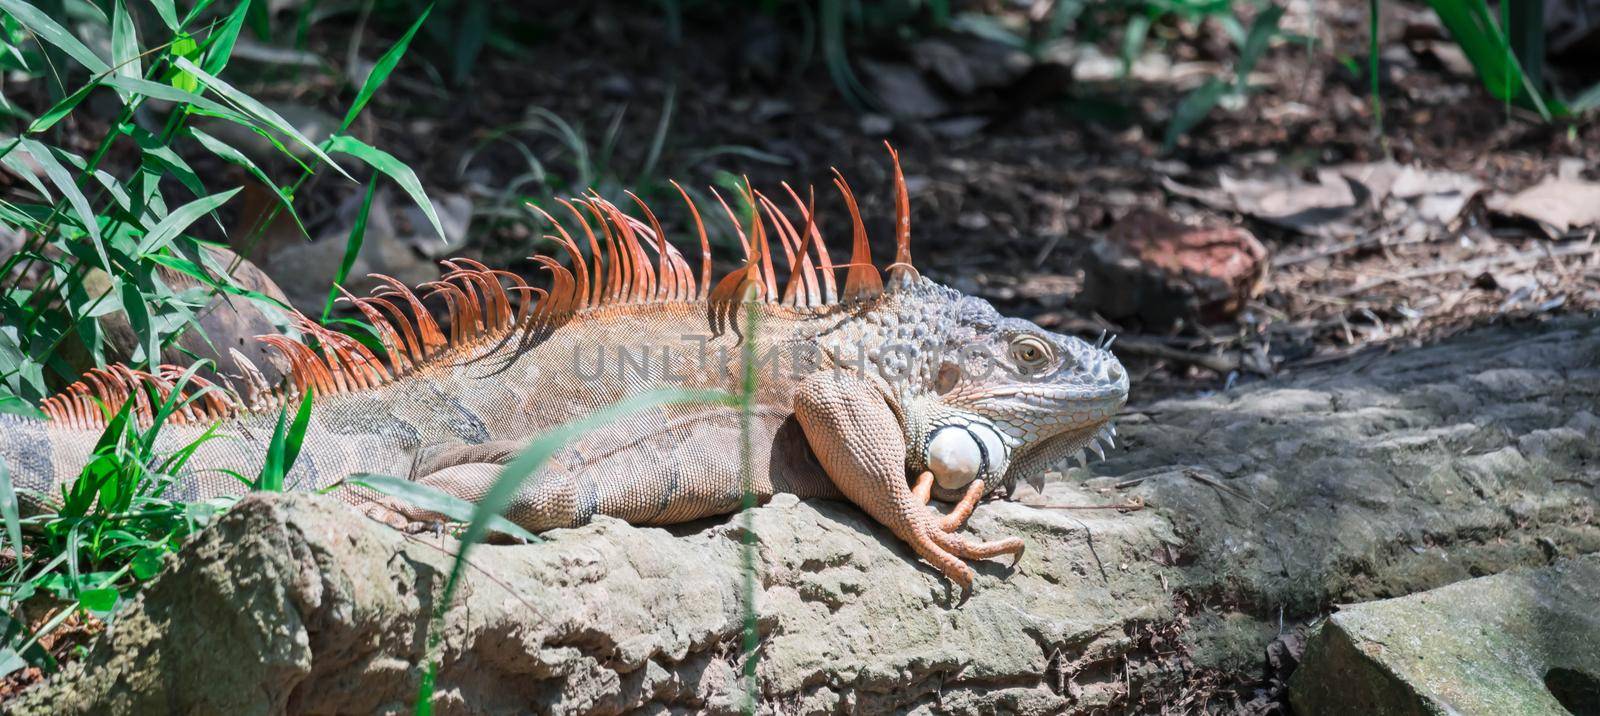 Lizard Iguana, in a zoo where lizards live. Iguana is a genus of herbivorous lizards that are native to tropical areas of Mexico by billroque